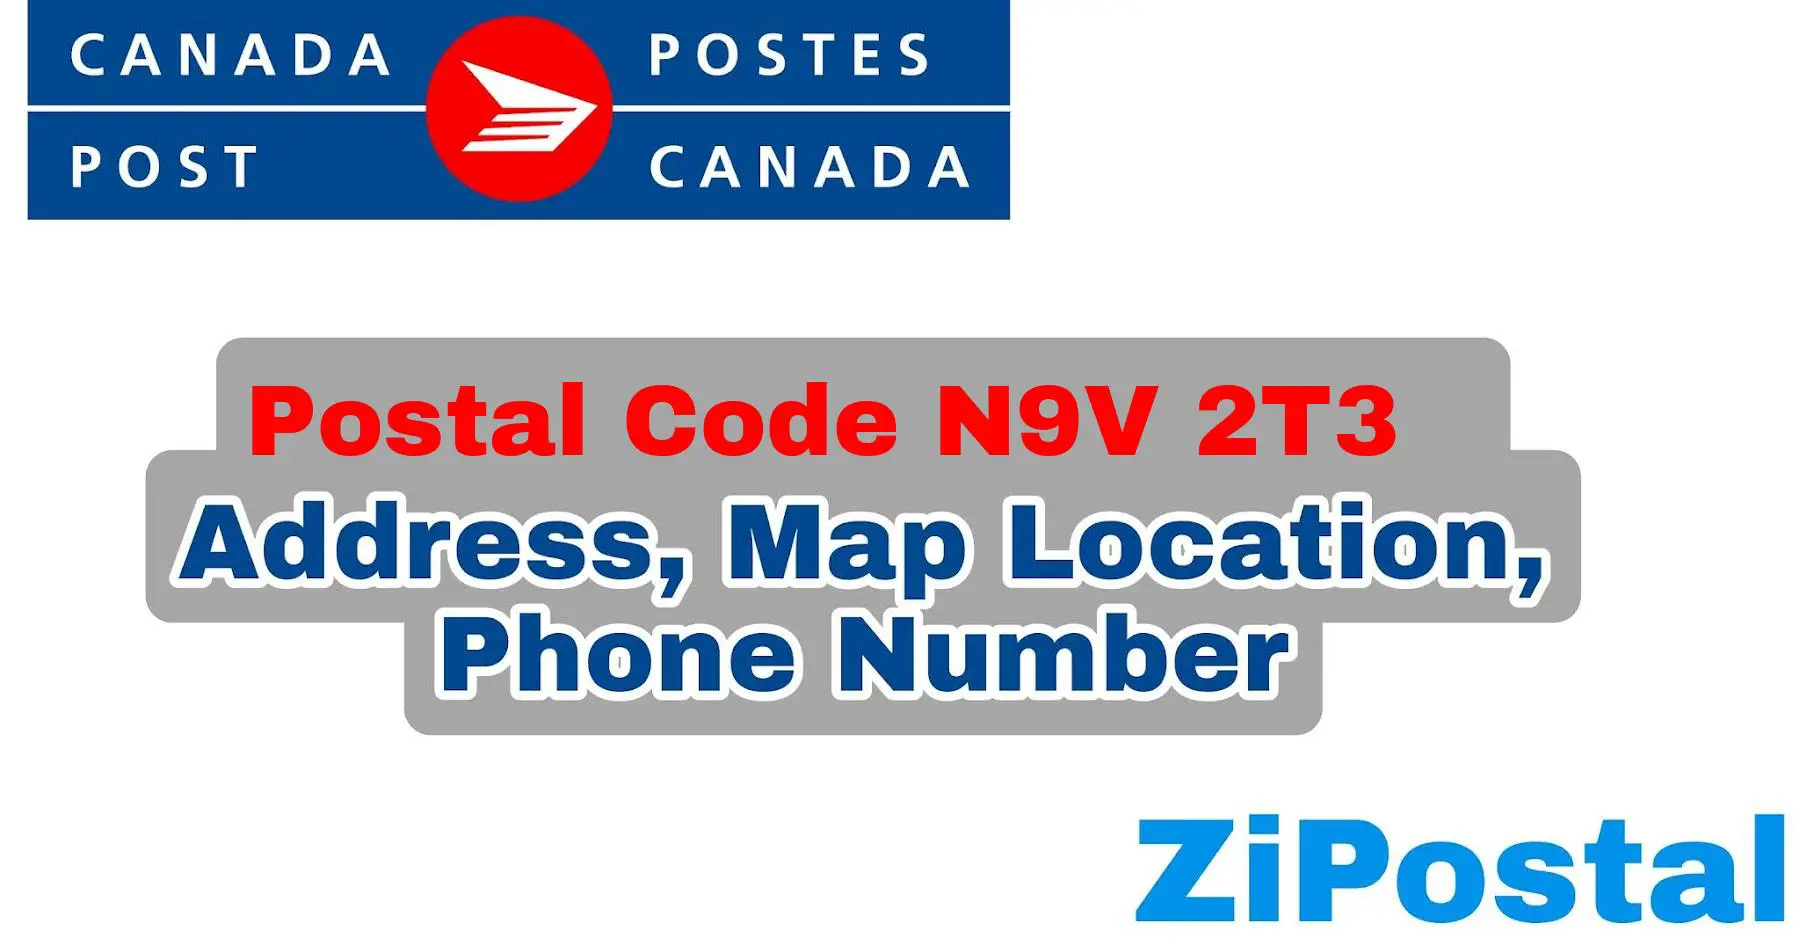 Postal Code N9V 2T3 Address Map Location and Phone Number